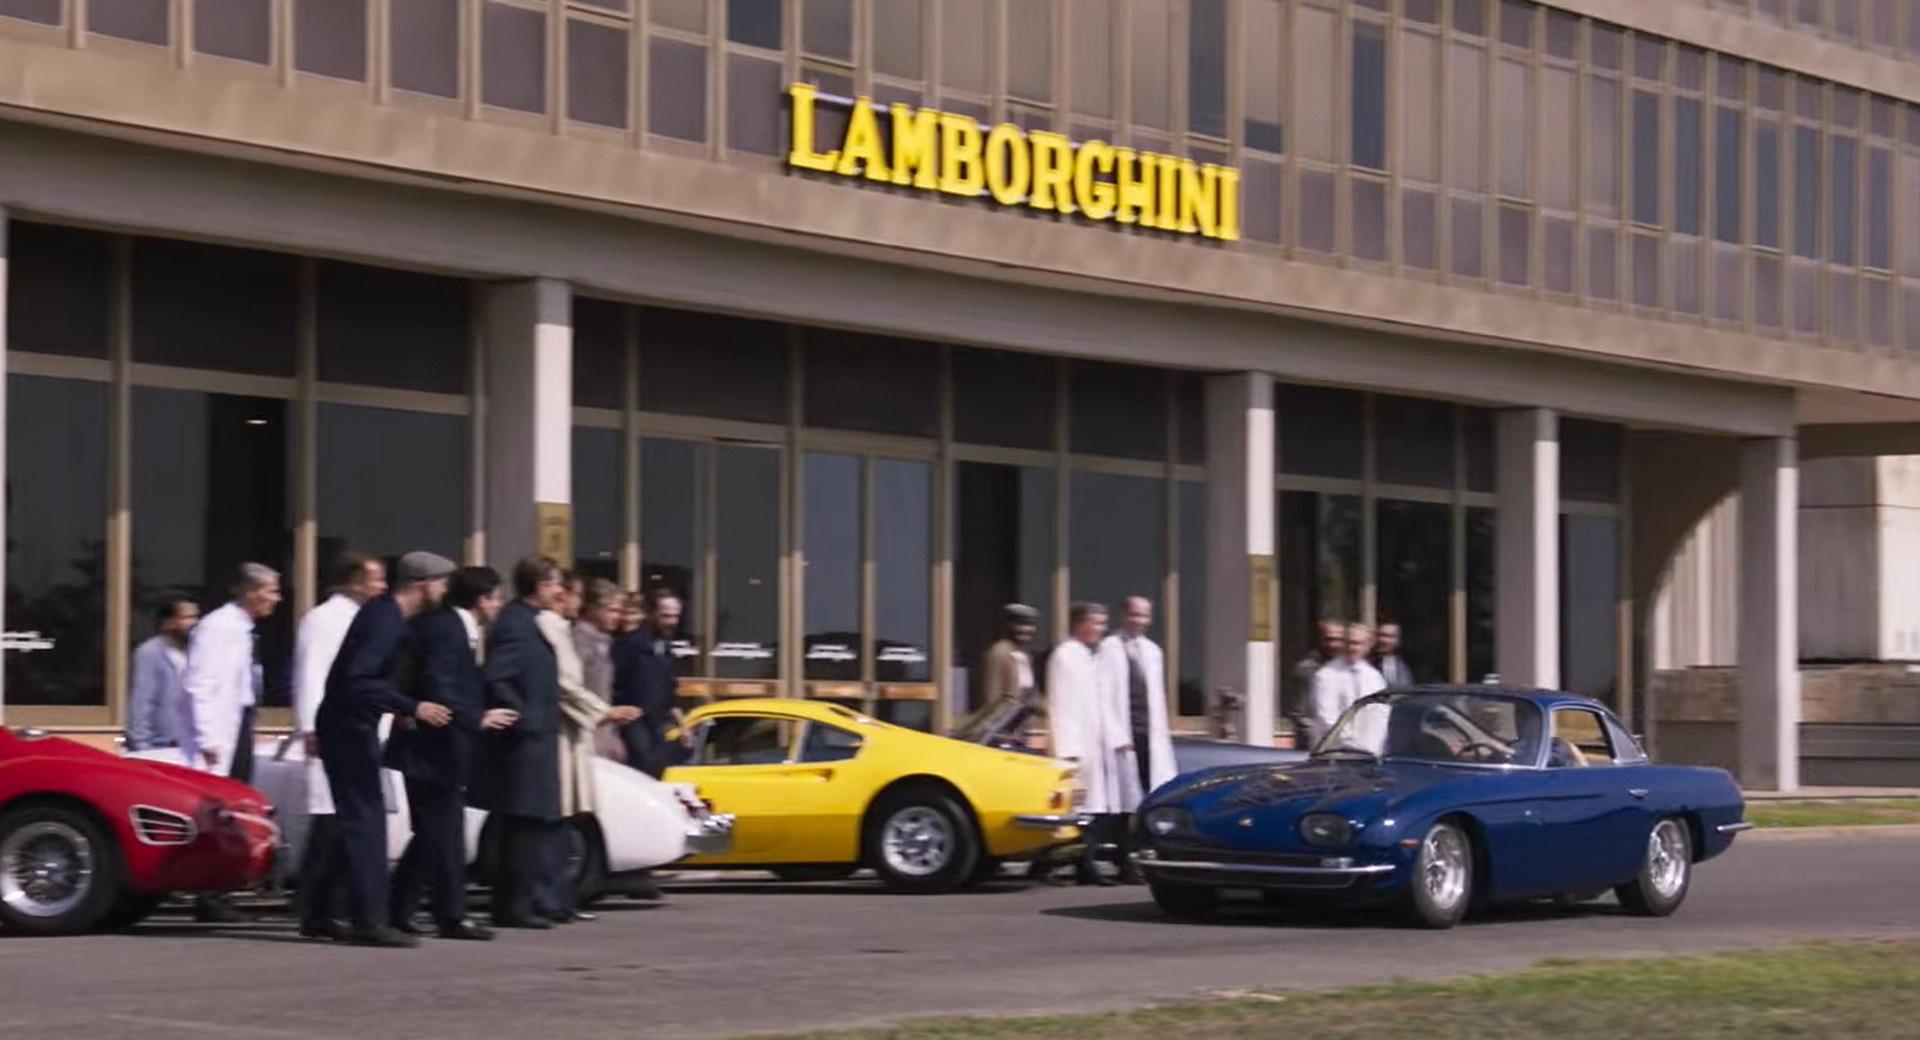 Watch The Trailer For “Lamborghini: The Man Behind The Legend